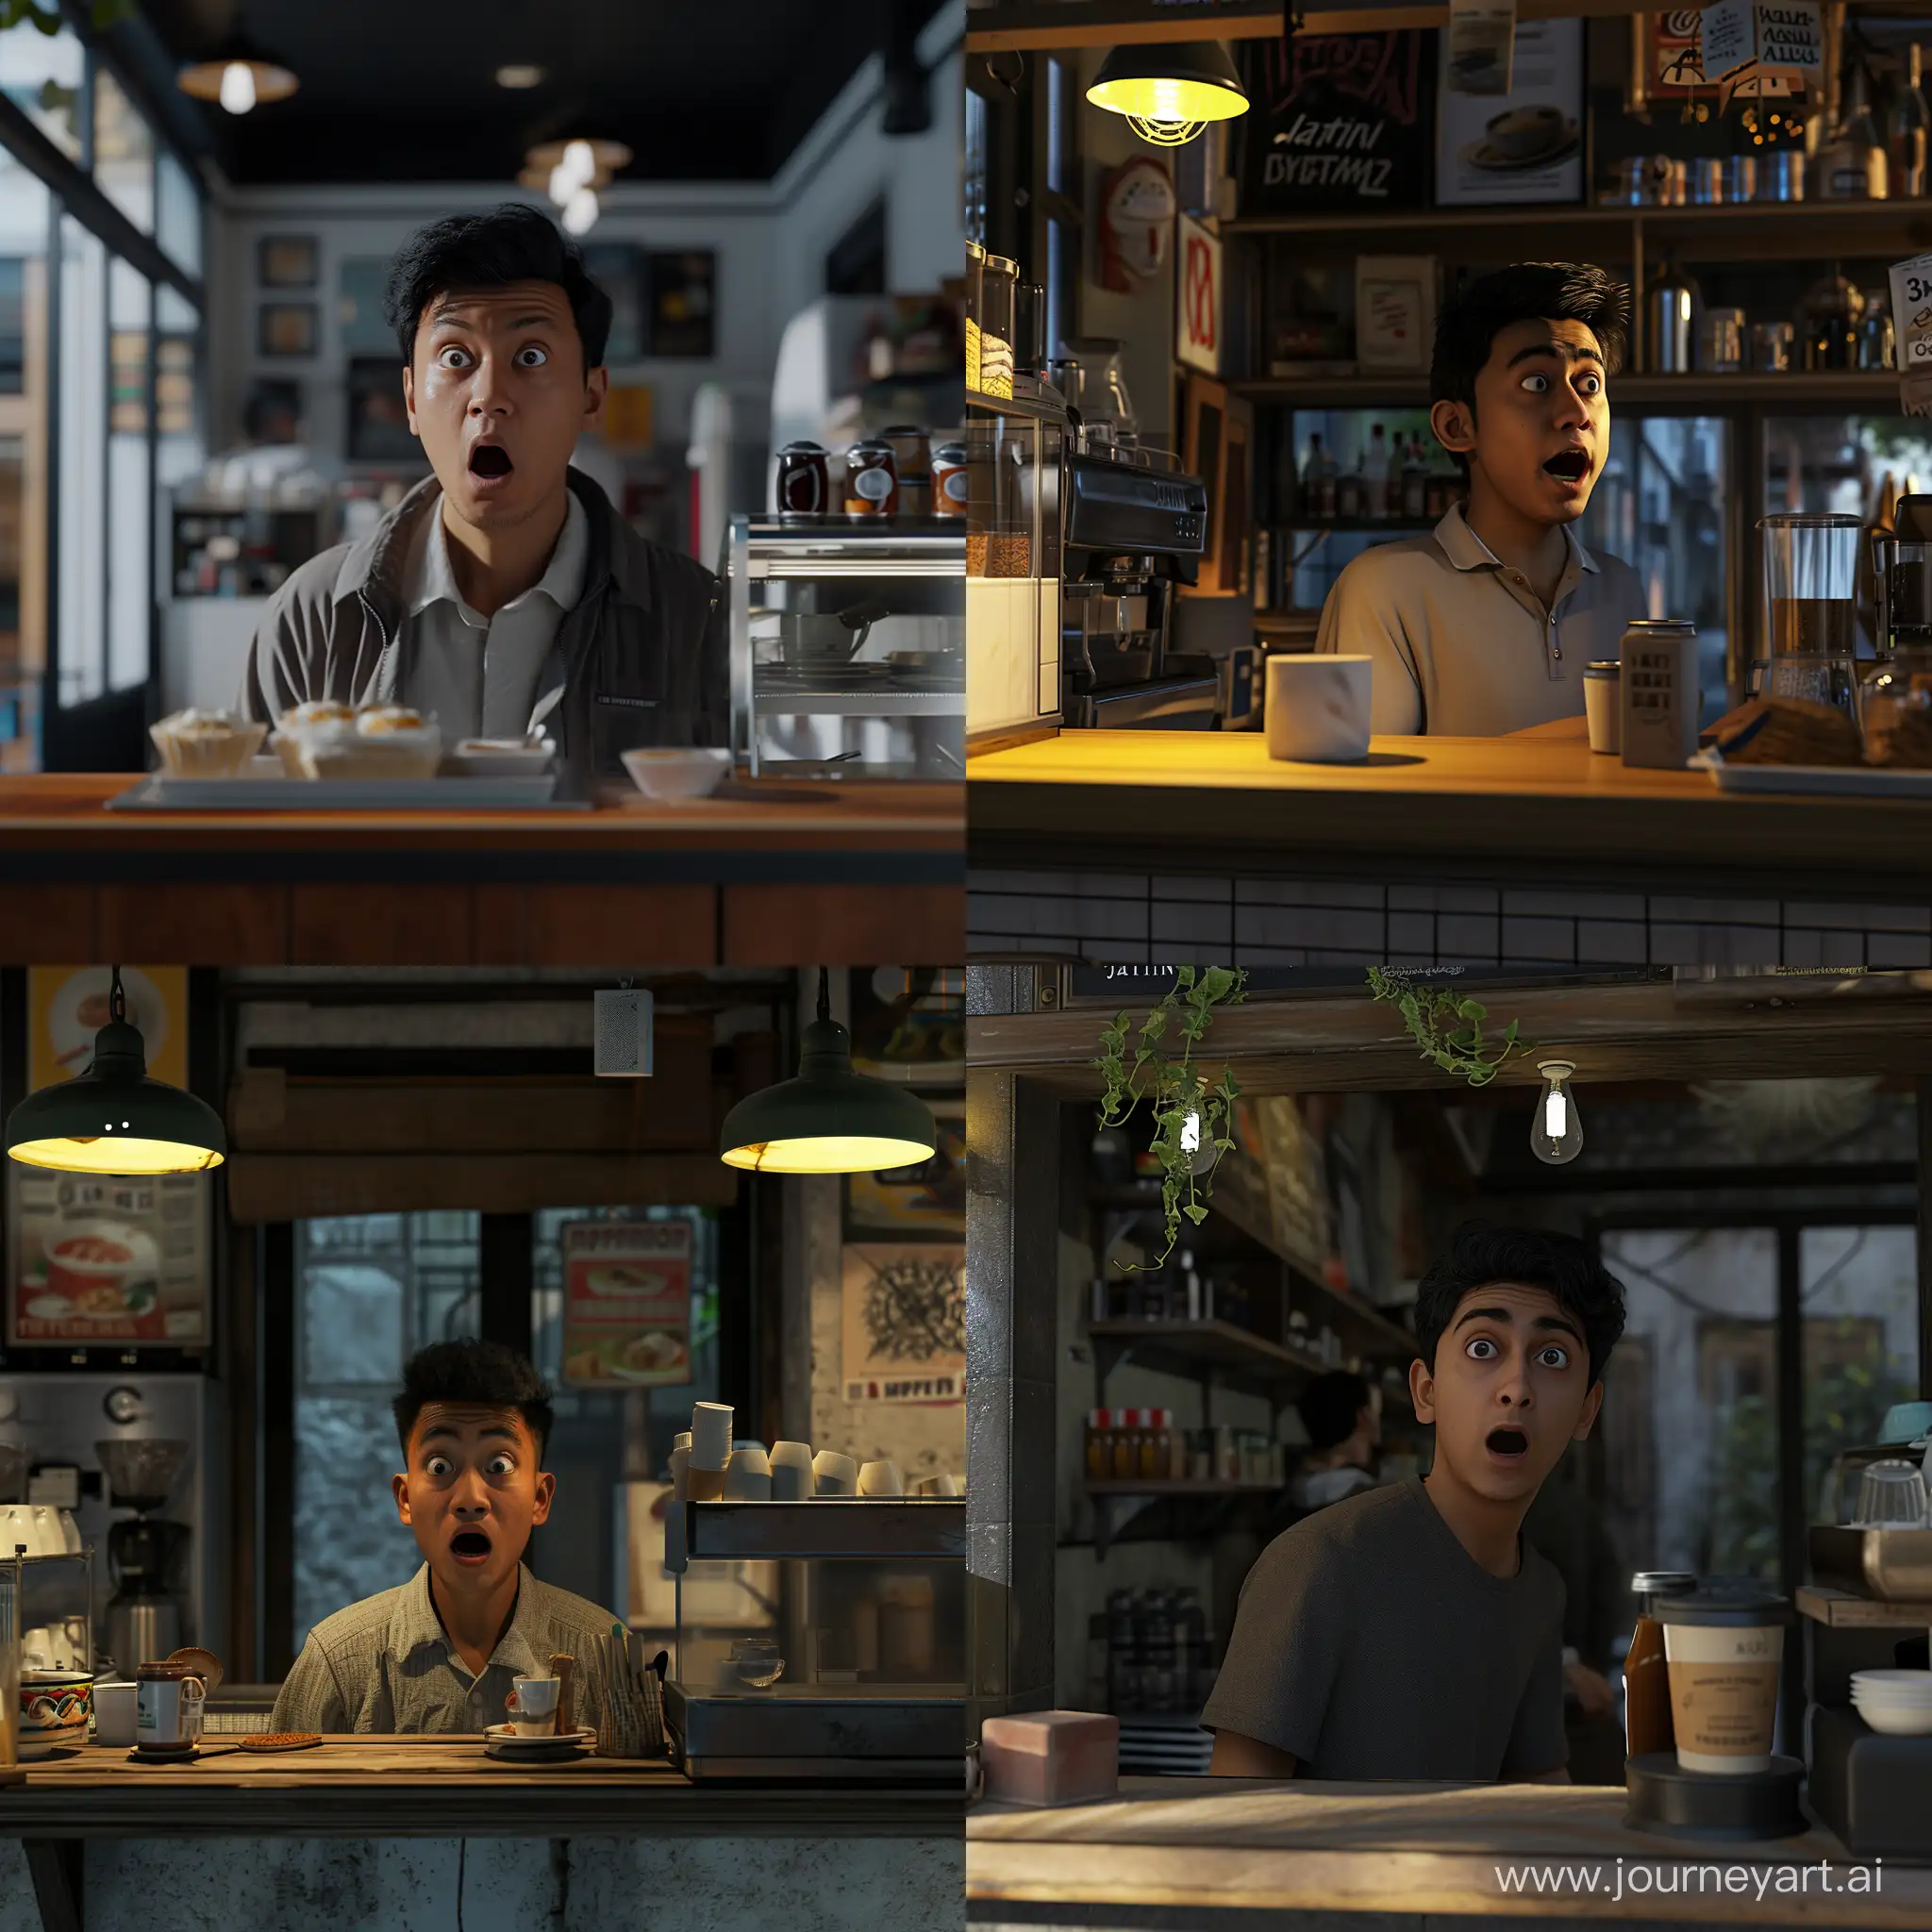 [Depict a medium shot of Jatin, a  man with an ordinary appearance, standing behind the counter of a small café. Show him looking surprised and intrigued as he gazes at something off-screen. Convey his curiosity and anticipation] unreal engine, hyper real --